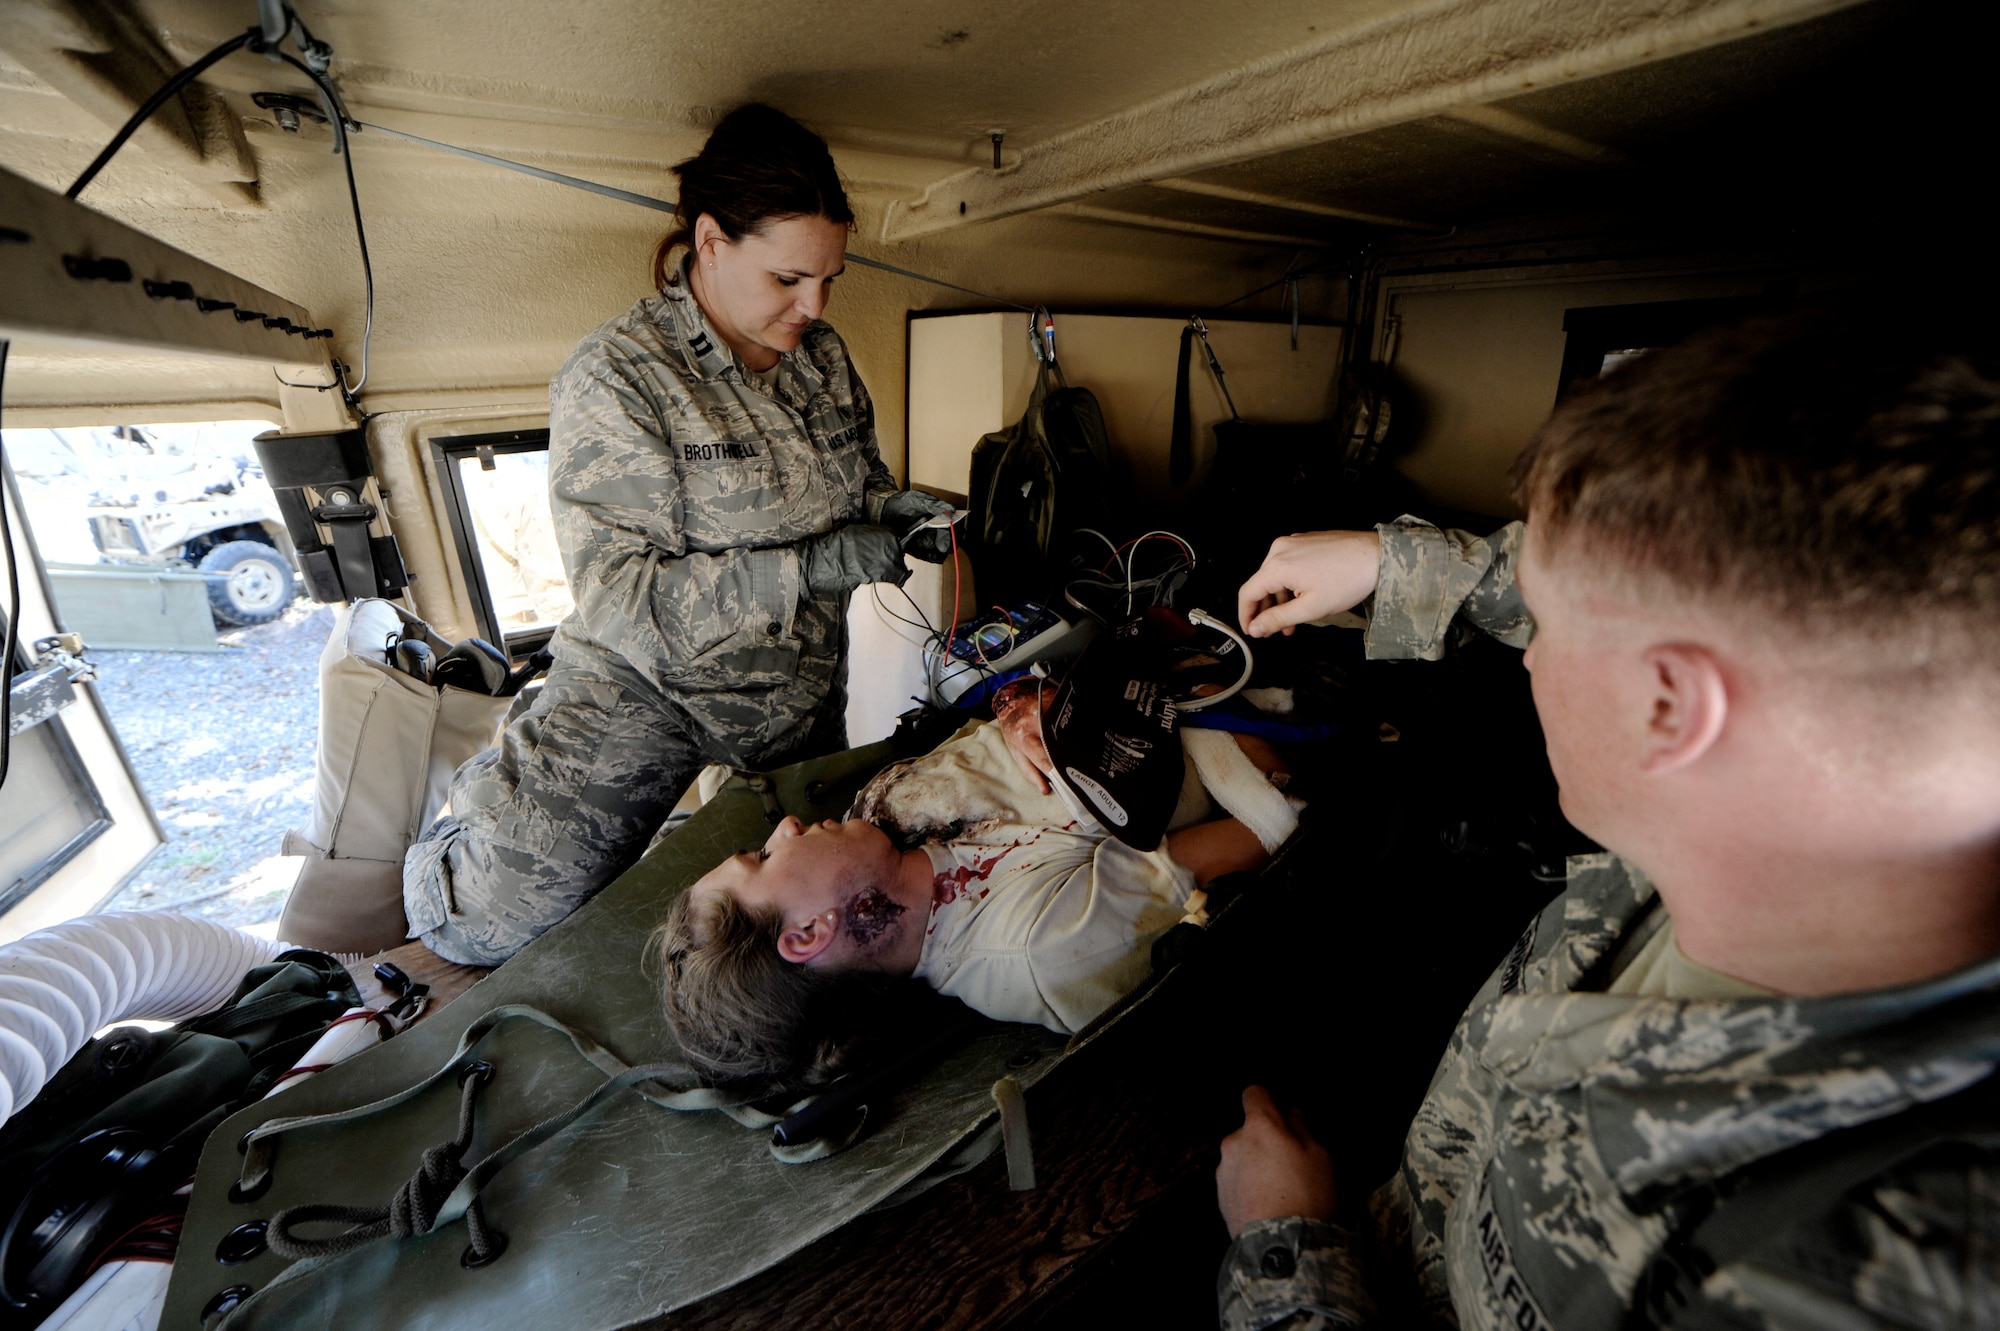 Oregon Air National Guard Senior Airman Melinda Duran, a medic assigned to the 173rd Fighter Wing Medical Group, begins to recieve treatment as she is transported after surviving a simulated collapsed building during Pathfinder-Minutemen Exercise, Aug. 5, 2015 at Camp Rilea in Warrenton, Ore. The annual event is a joint multi-agency, multi-state disaster preparedness exercise based on response to a possible Cascadia Subduction Zone event. Officials believe the Northwest is overdue for a magnitude 7.0 or greater earthquake. (U.S. Air National Guard photo by Tech. Sgt. John Hughel, 142nd Fighter Wing Public Affairs/Released)
